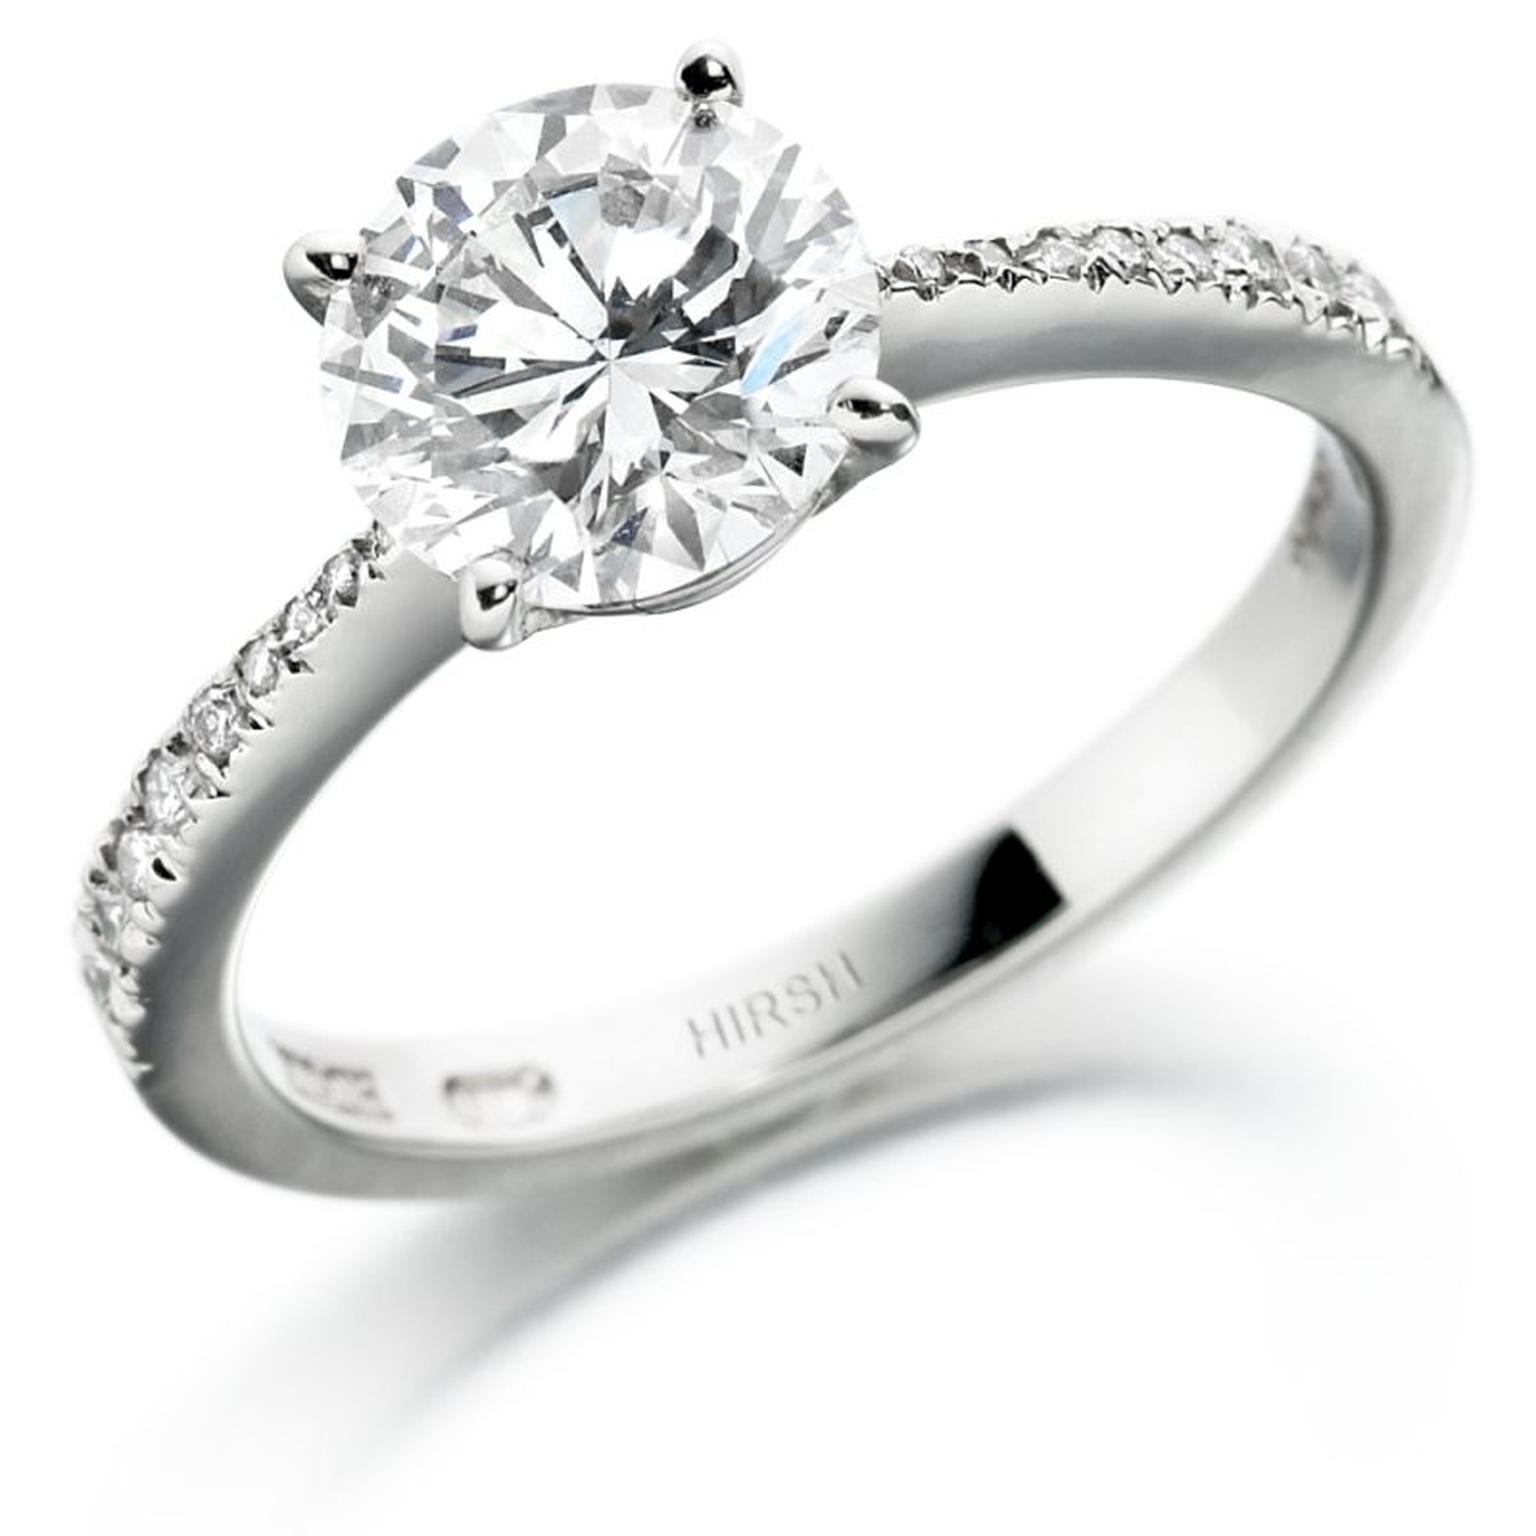 Hirsh 1.50ct brilliant-cut diamond engagement ring with a diamond pave´ band (£30,000).